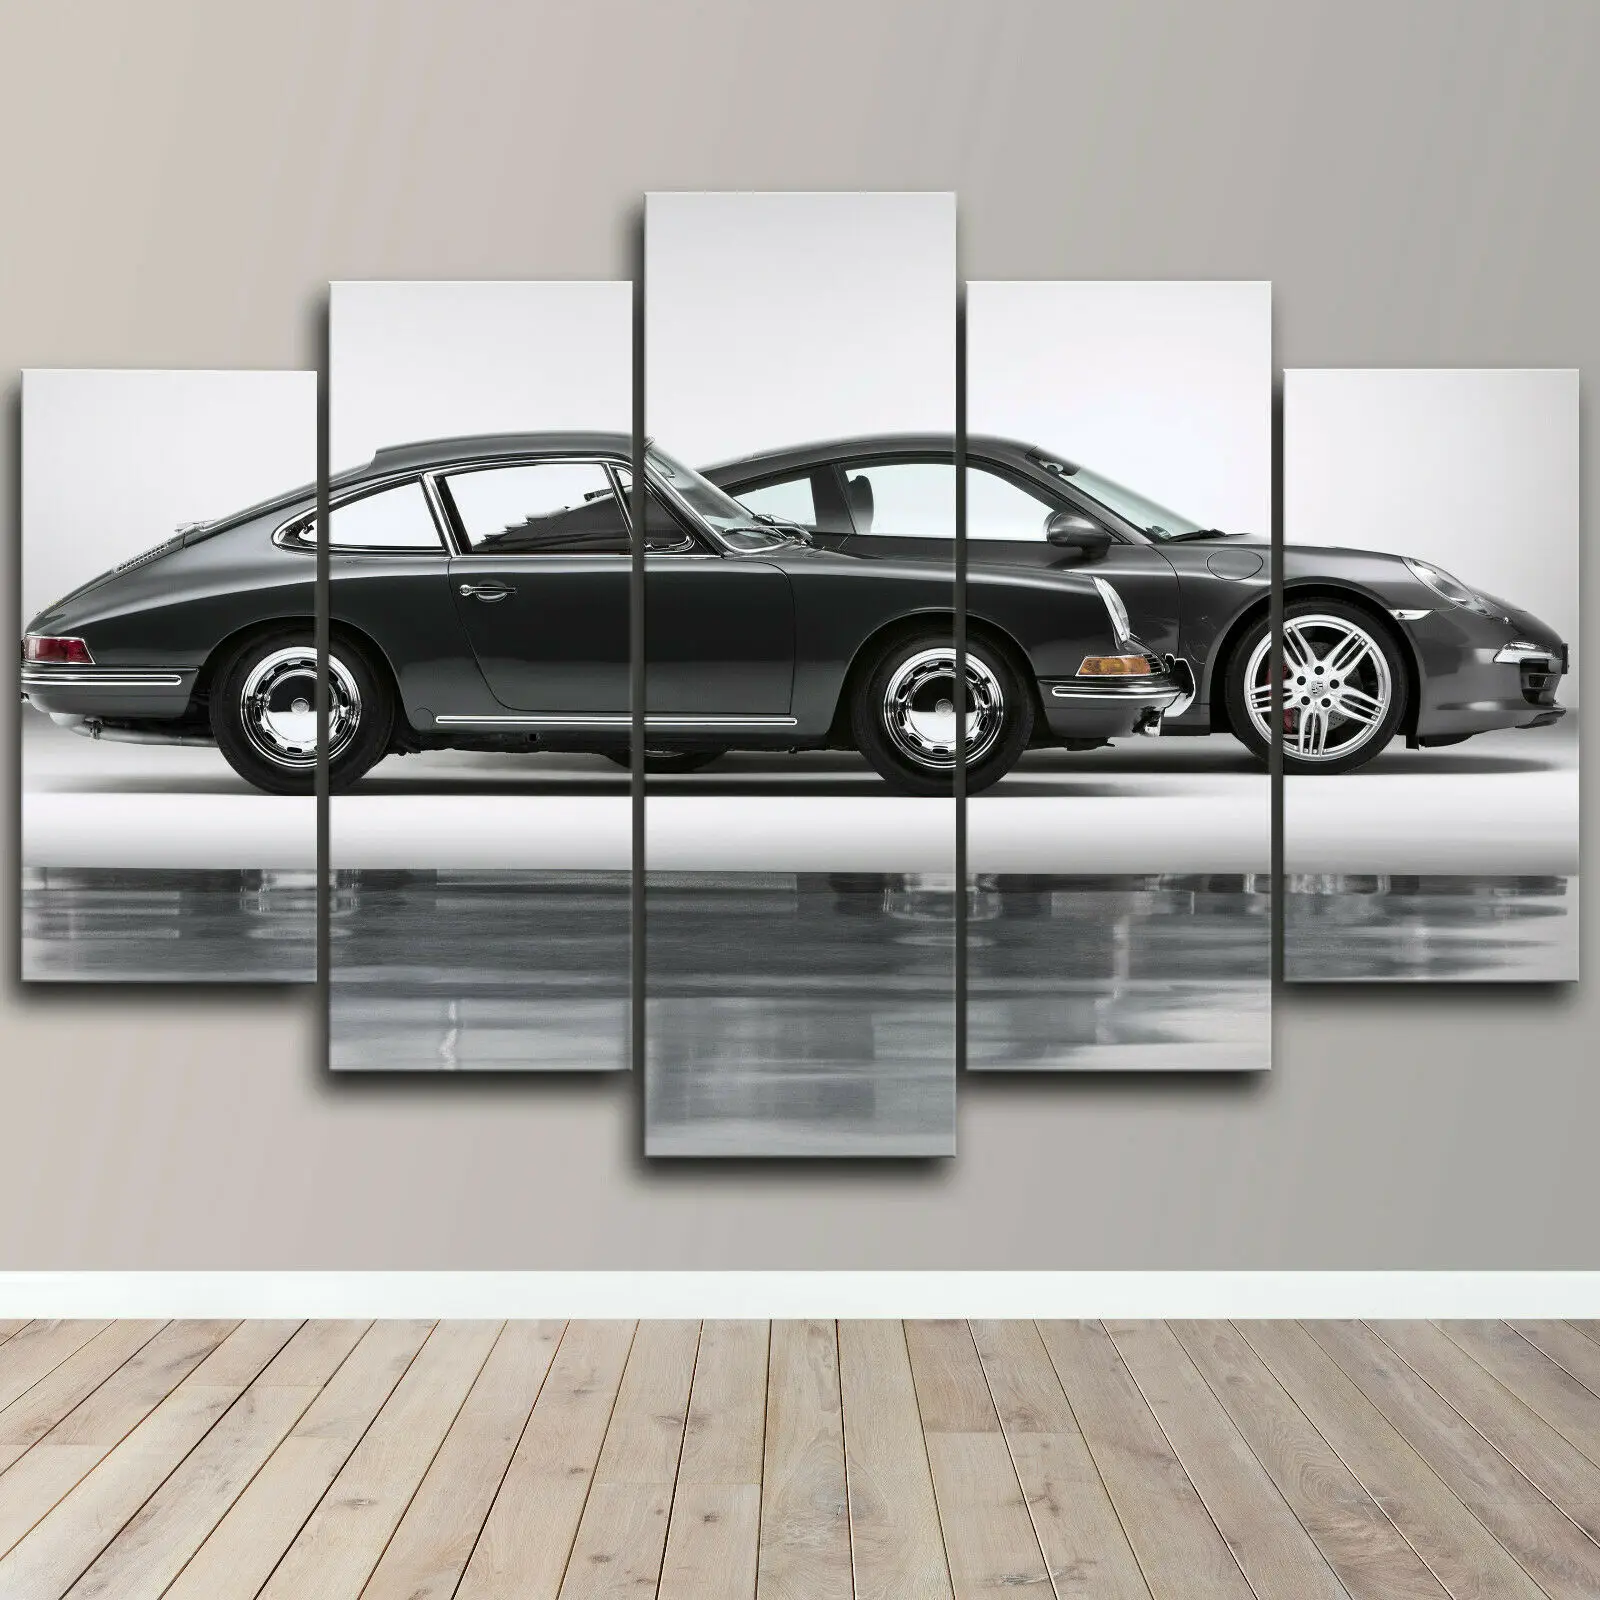 

No Framed Canvas 5 Panel Porsche 911 Coupe Black Sports Car Modular HD Decorative Wall Art Posters Pictures Home Decor Paintings